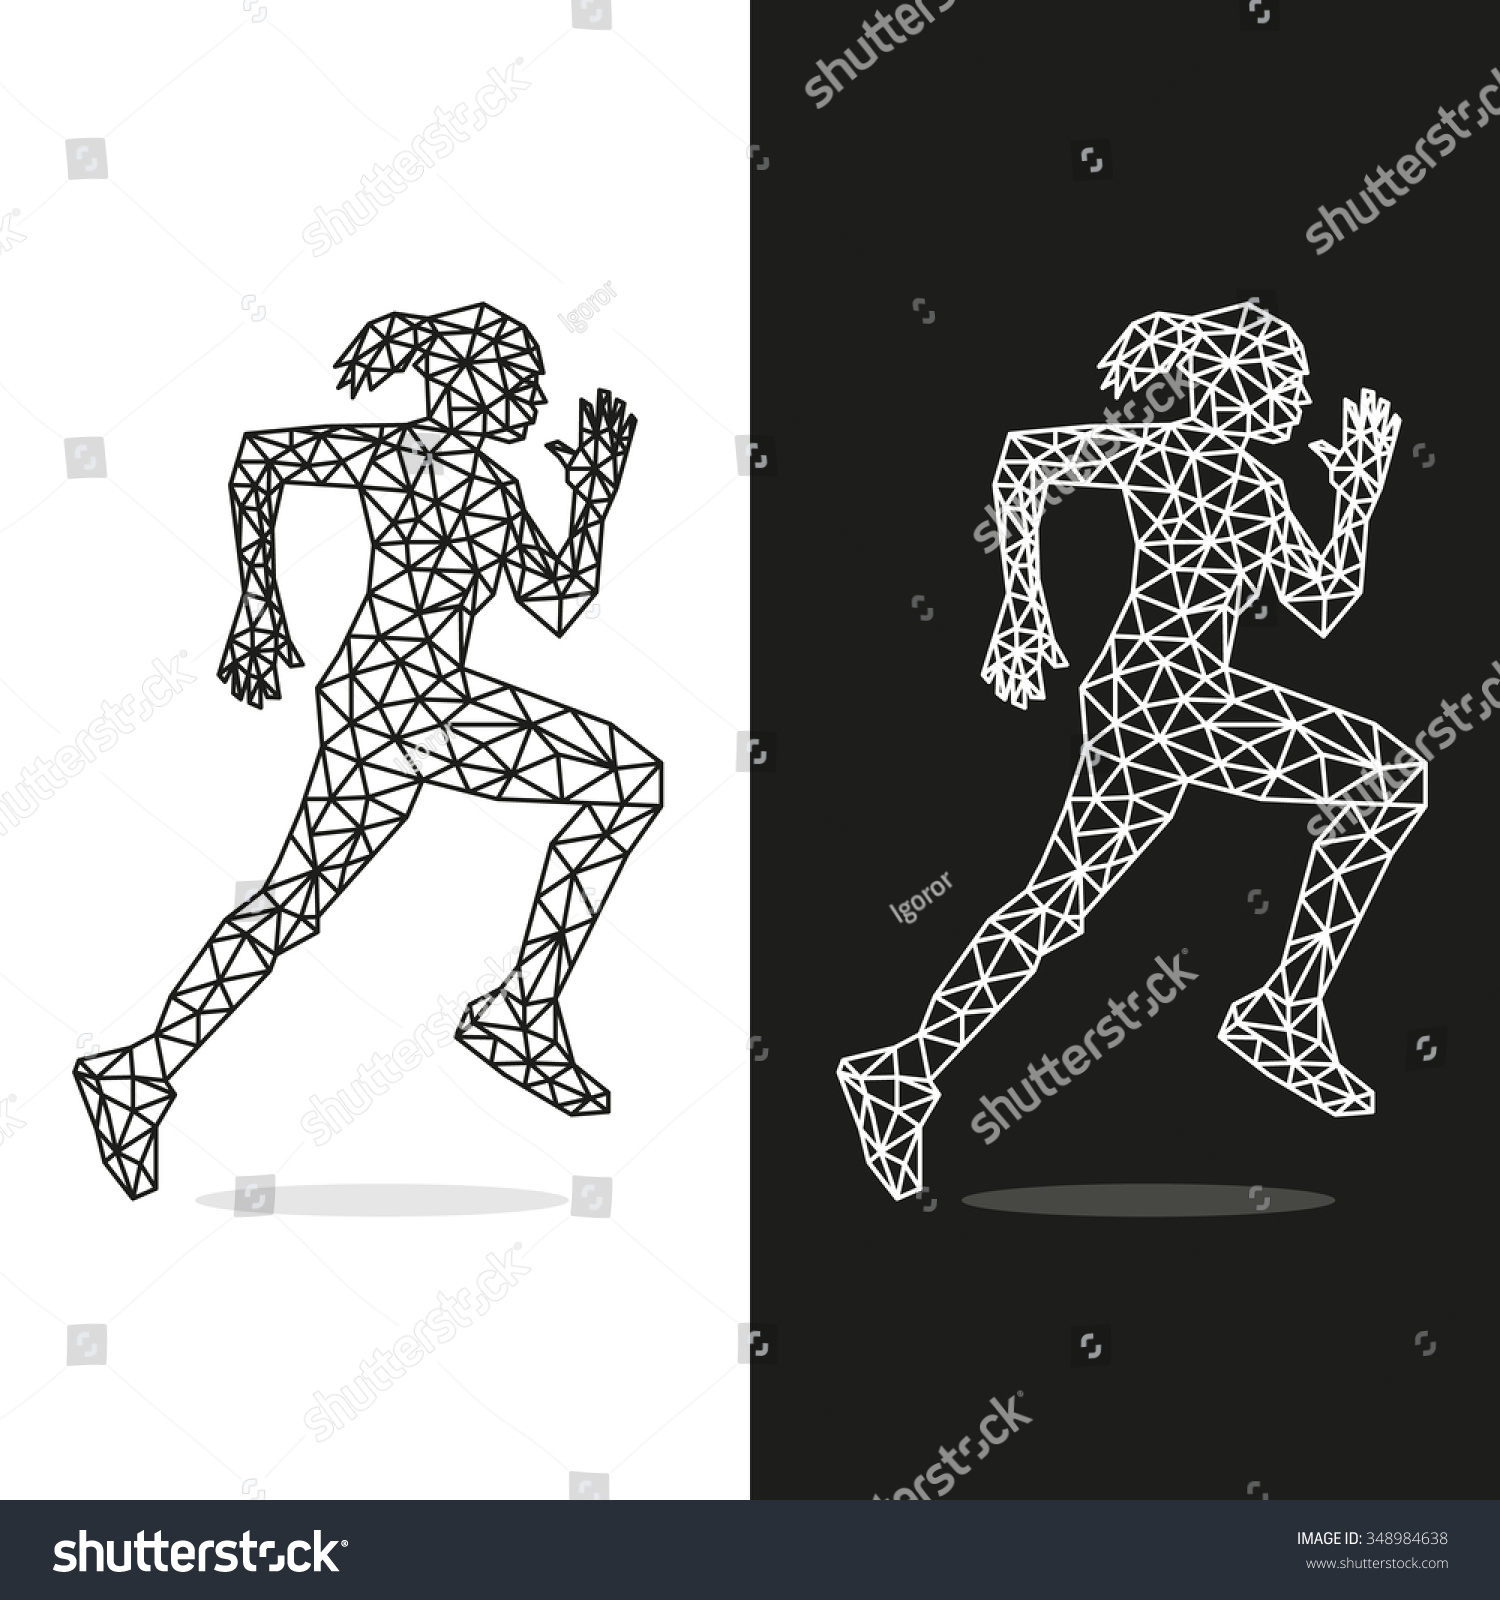 Runners Set Of Lines In Competitions In Different Colors. Stock Vector ...